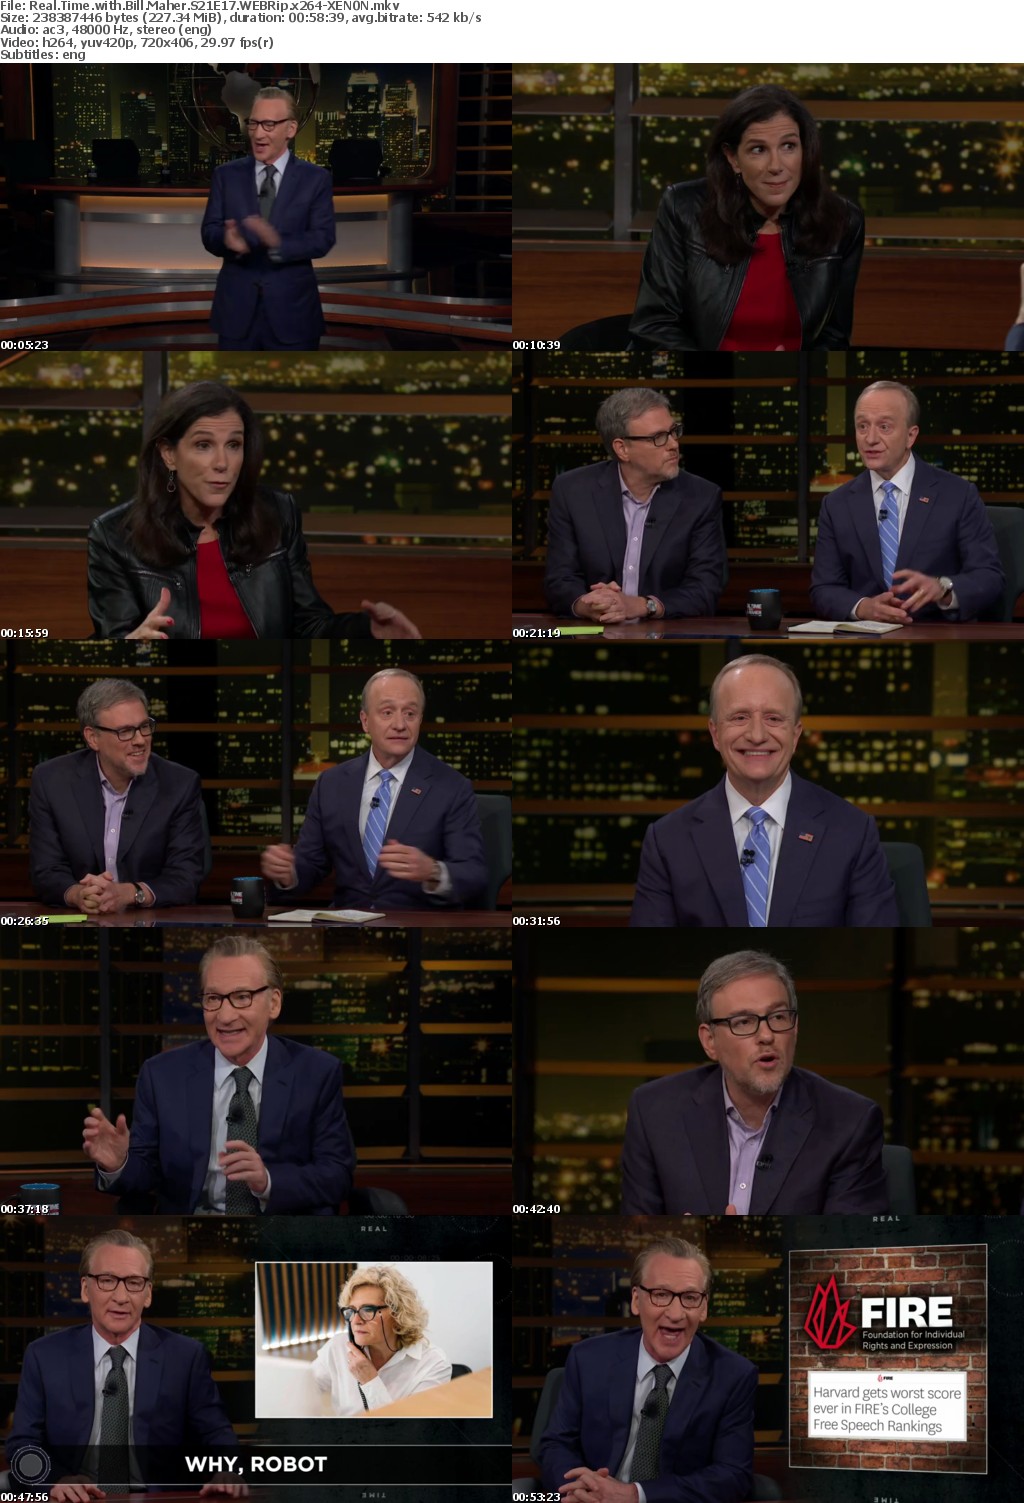 Real Time with Bill Maher S21E17 WEBRip x264-XEN0N